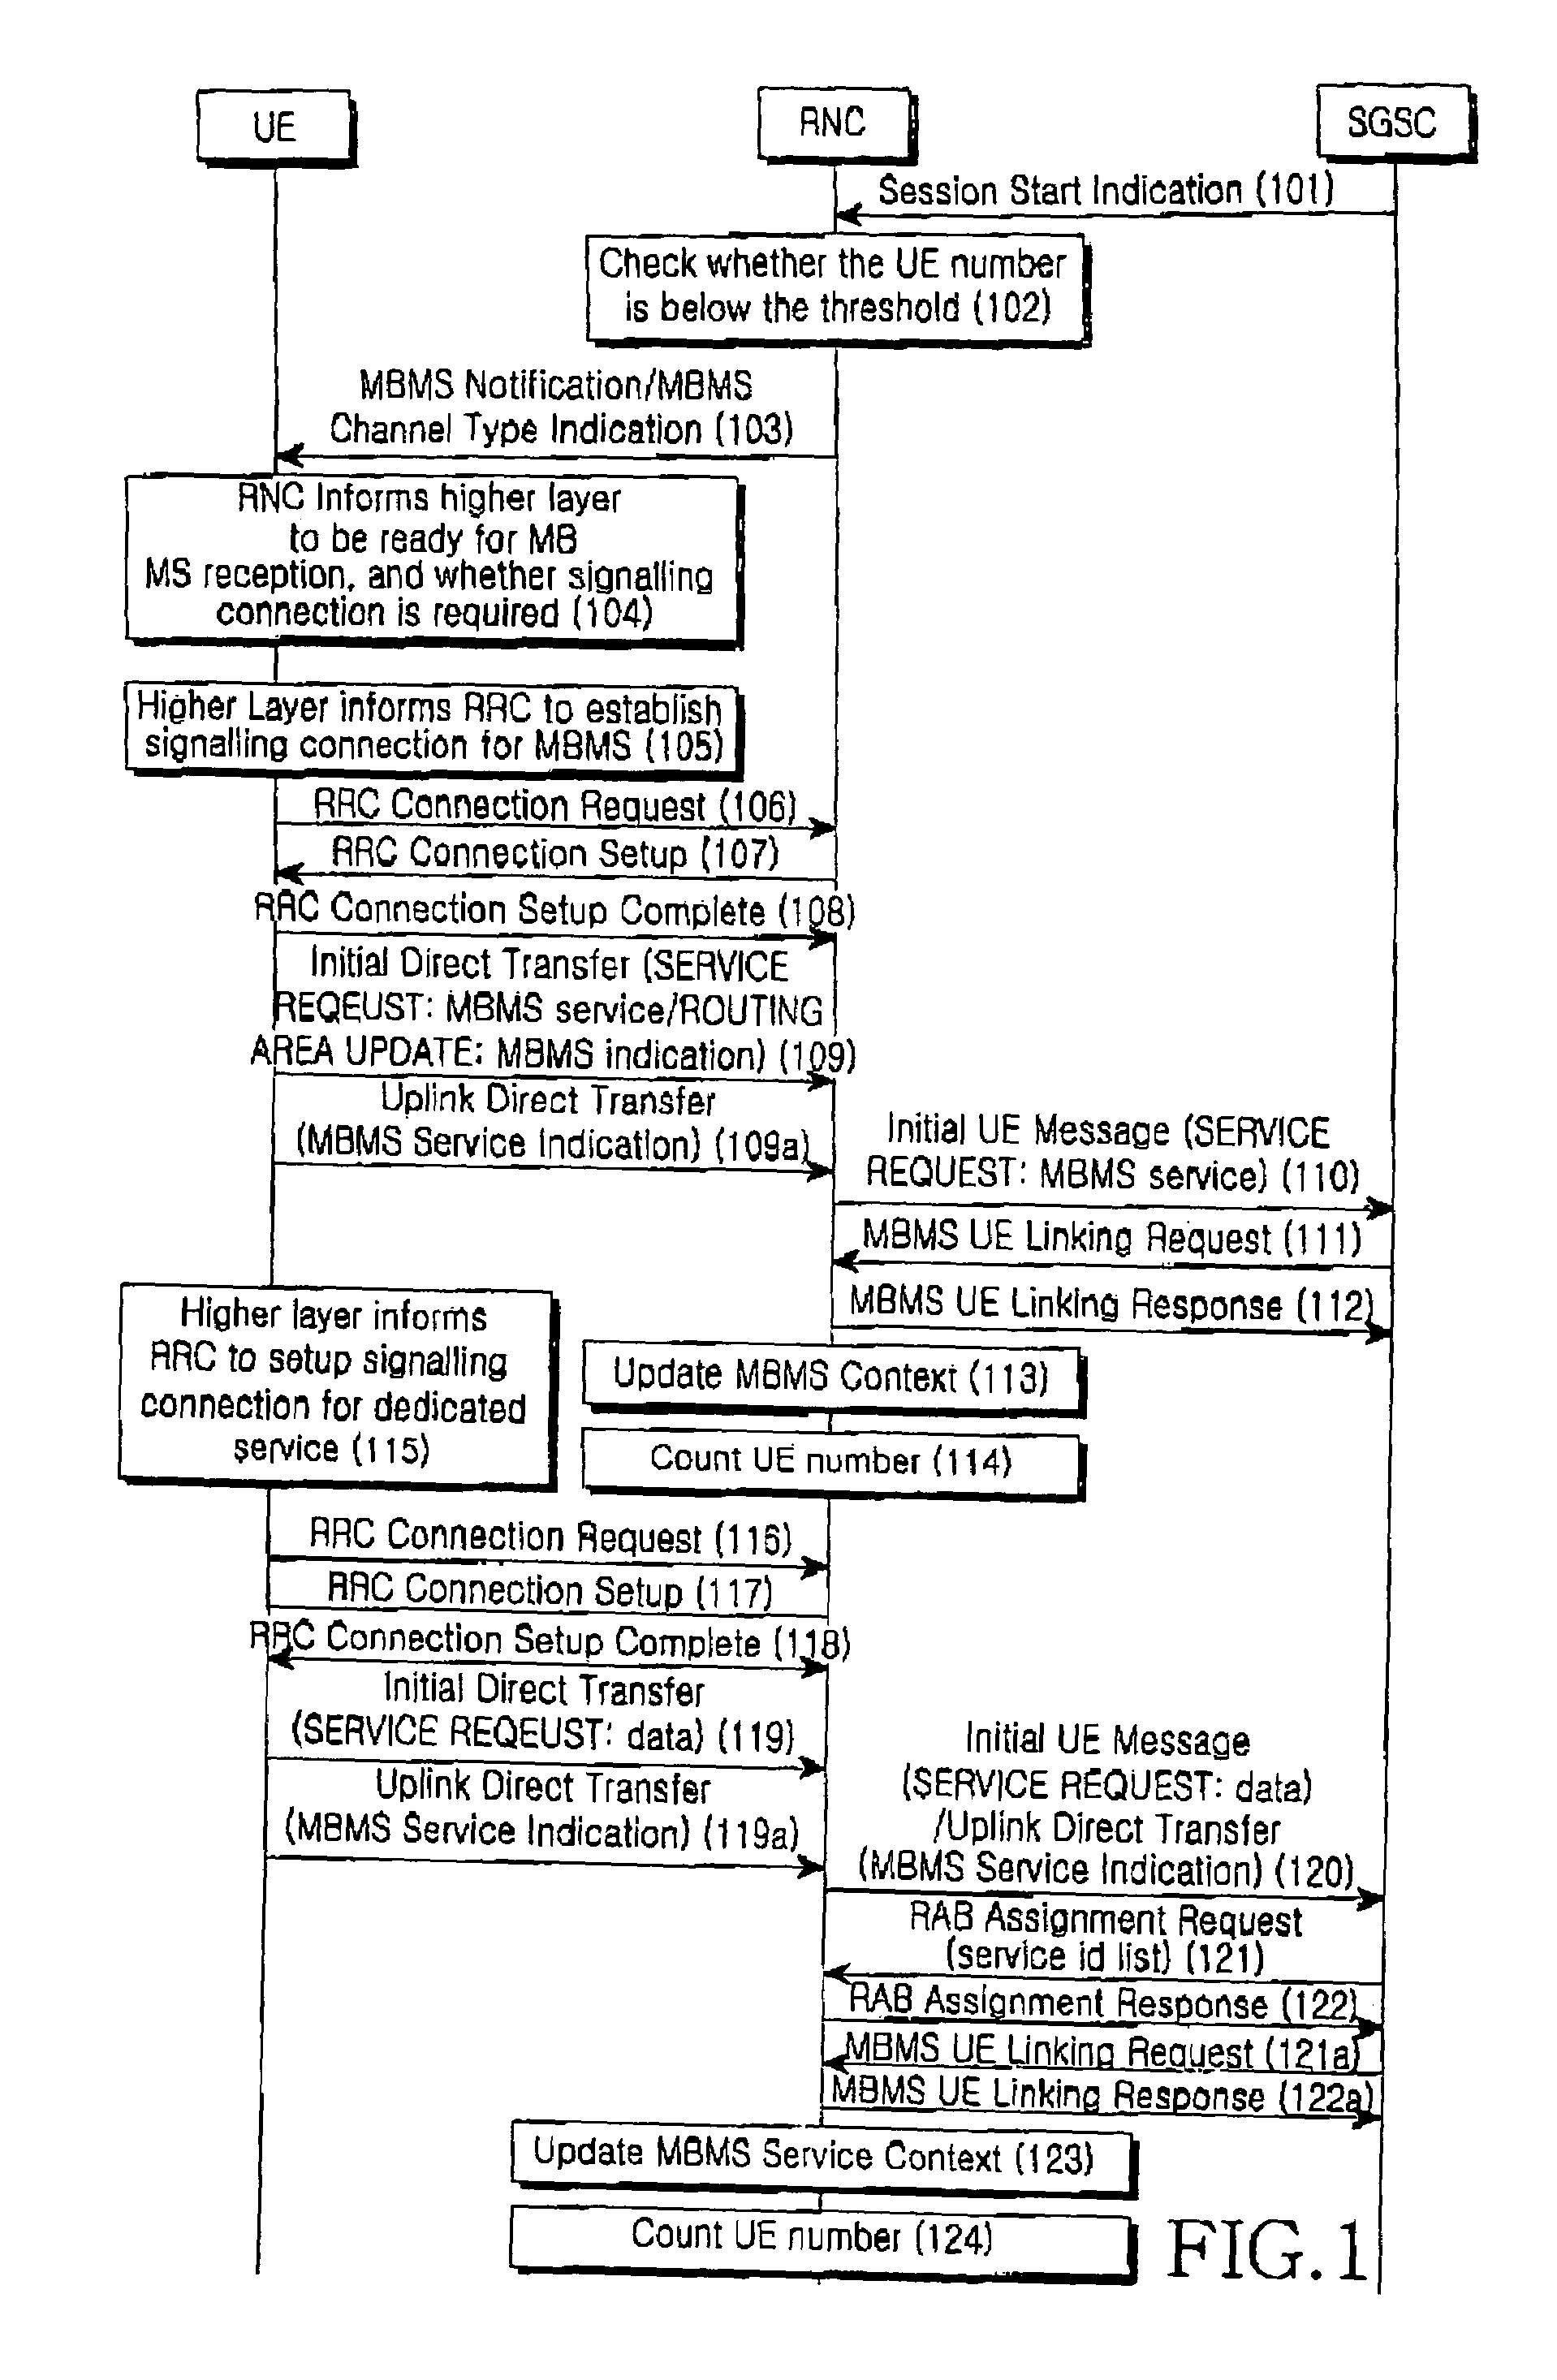 Method for distinguishing MBMS service request from other service requests